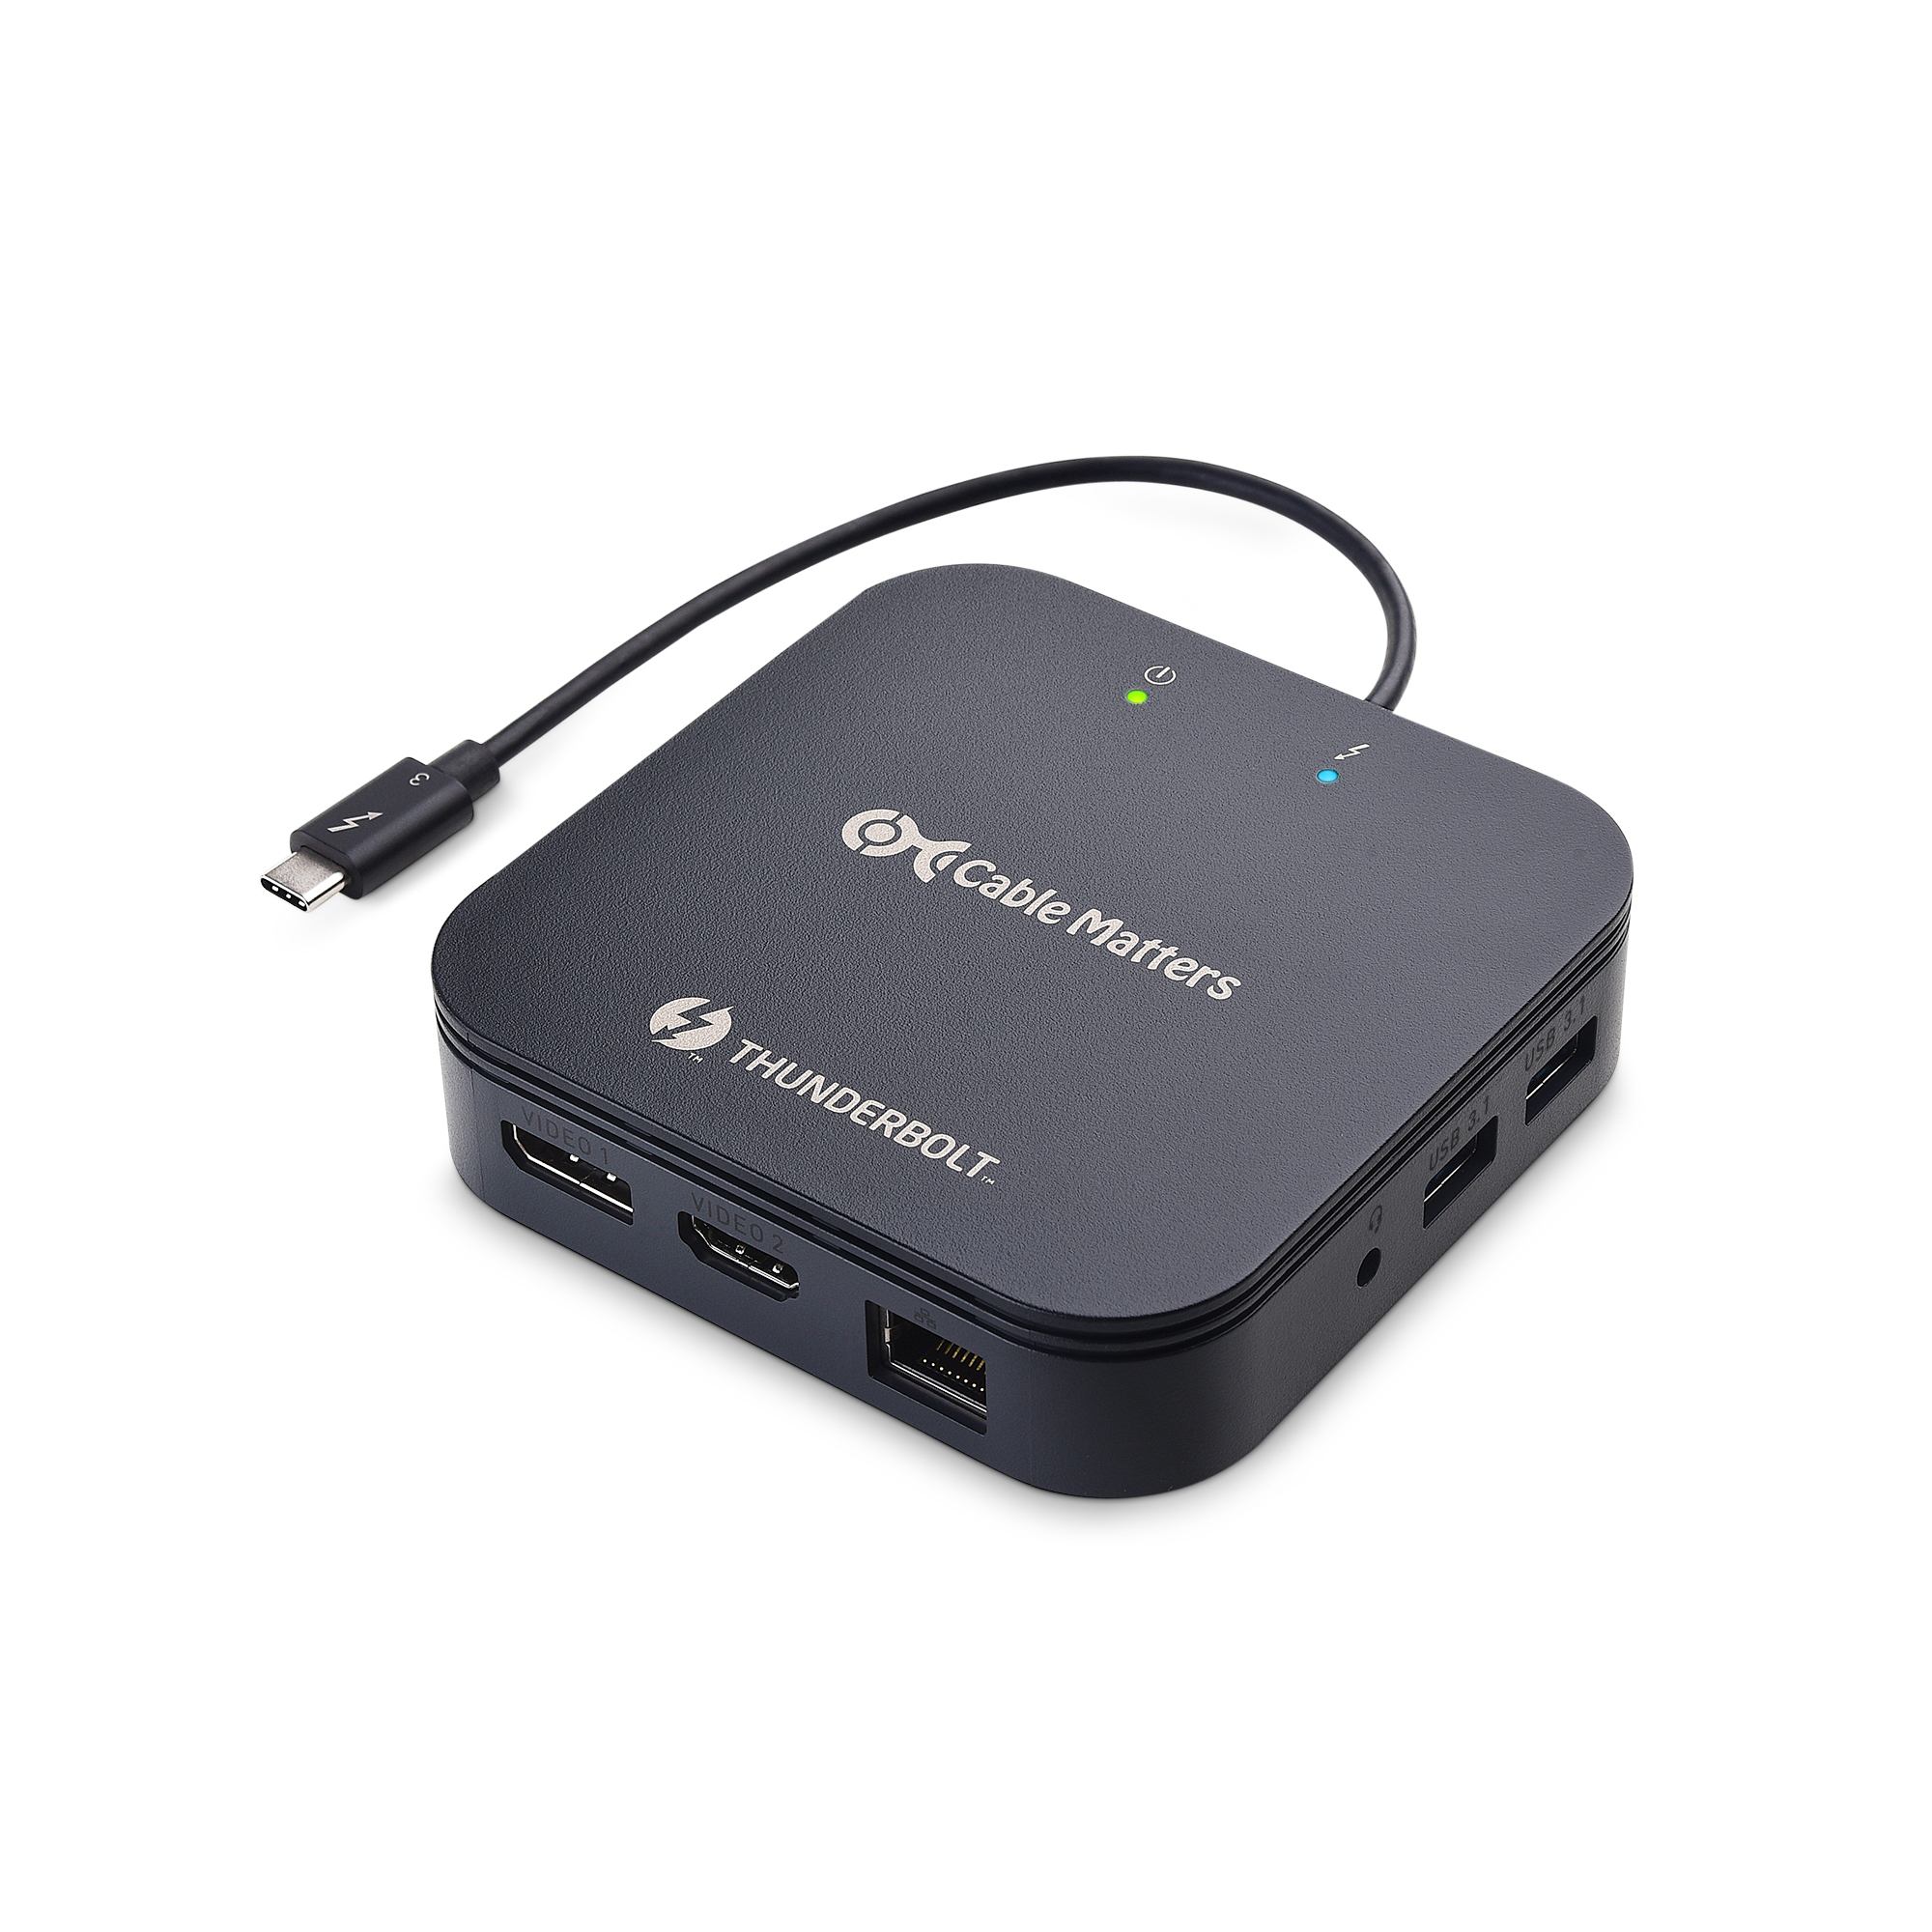 Cable Matters Thunderbolt 3 Travel Dock with HDMI 2.0 and 3.1, Gigabit Ethernet, Audio, and 60W Charging | Thunderbolt Technology Community